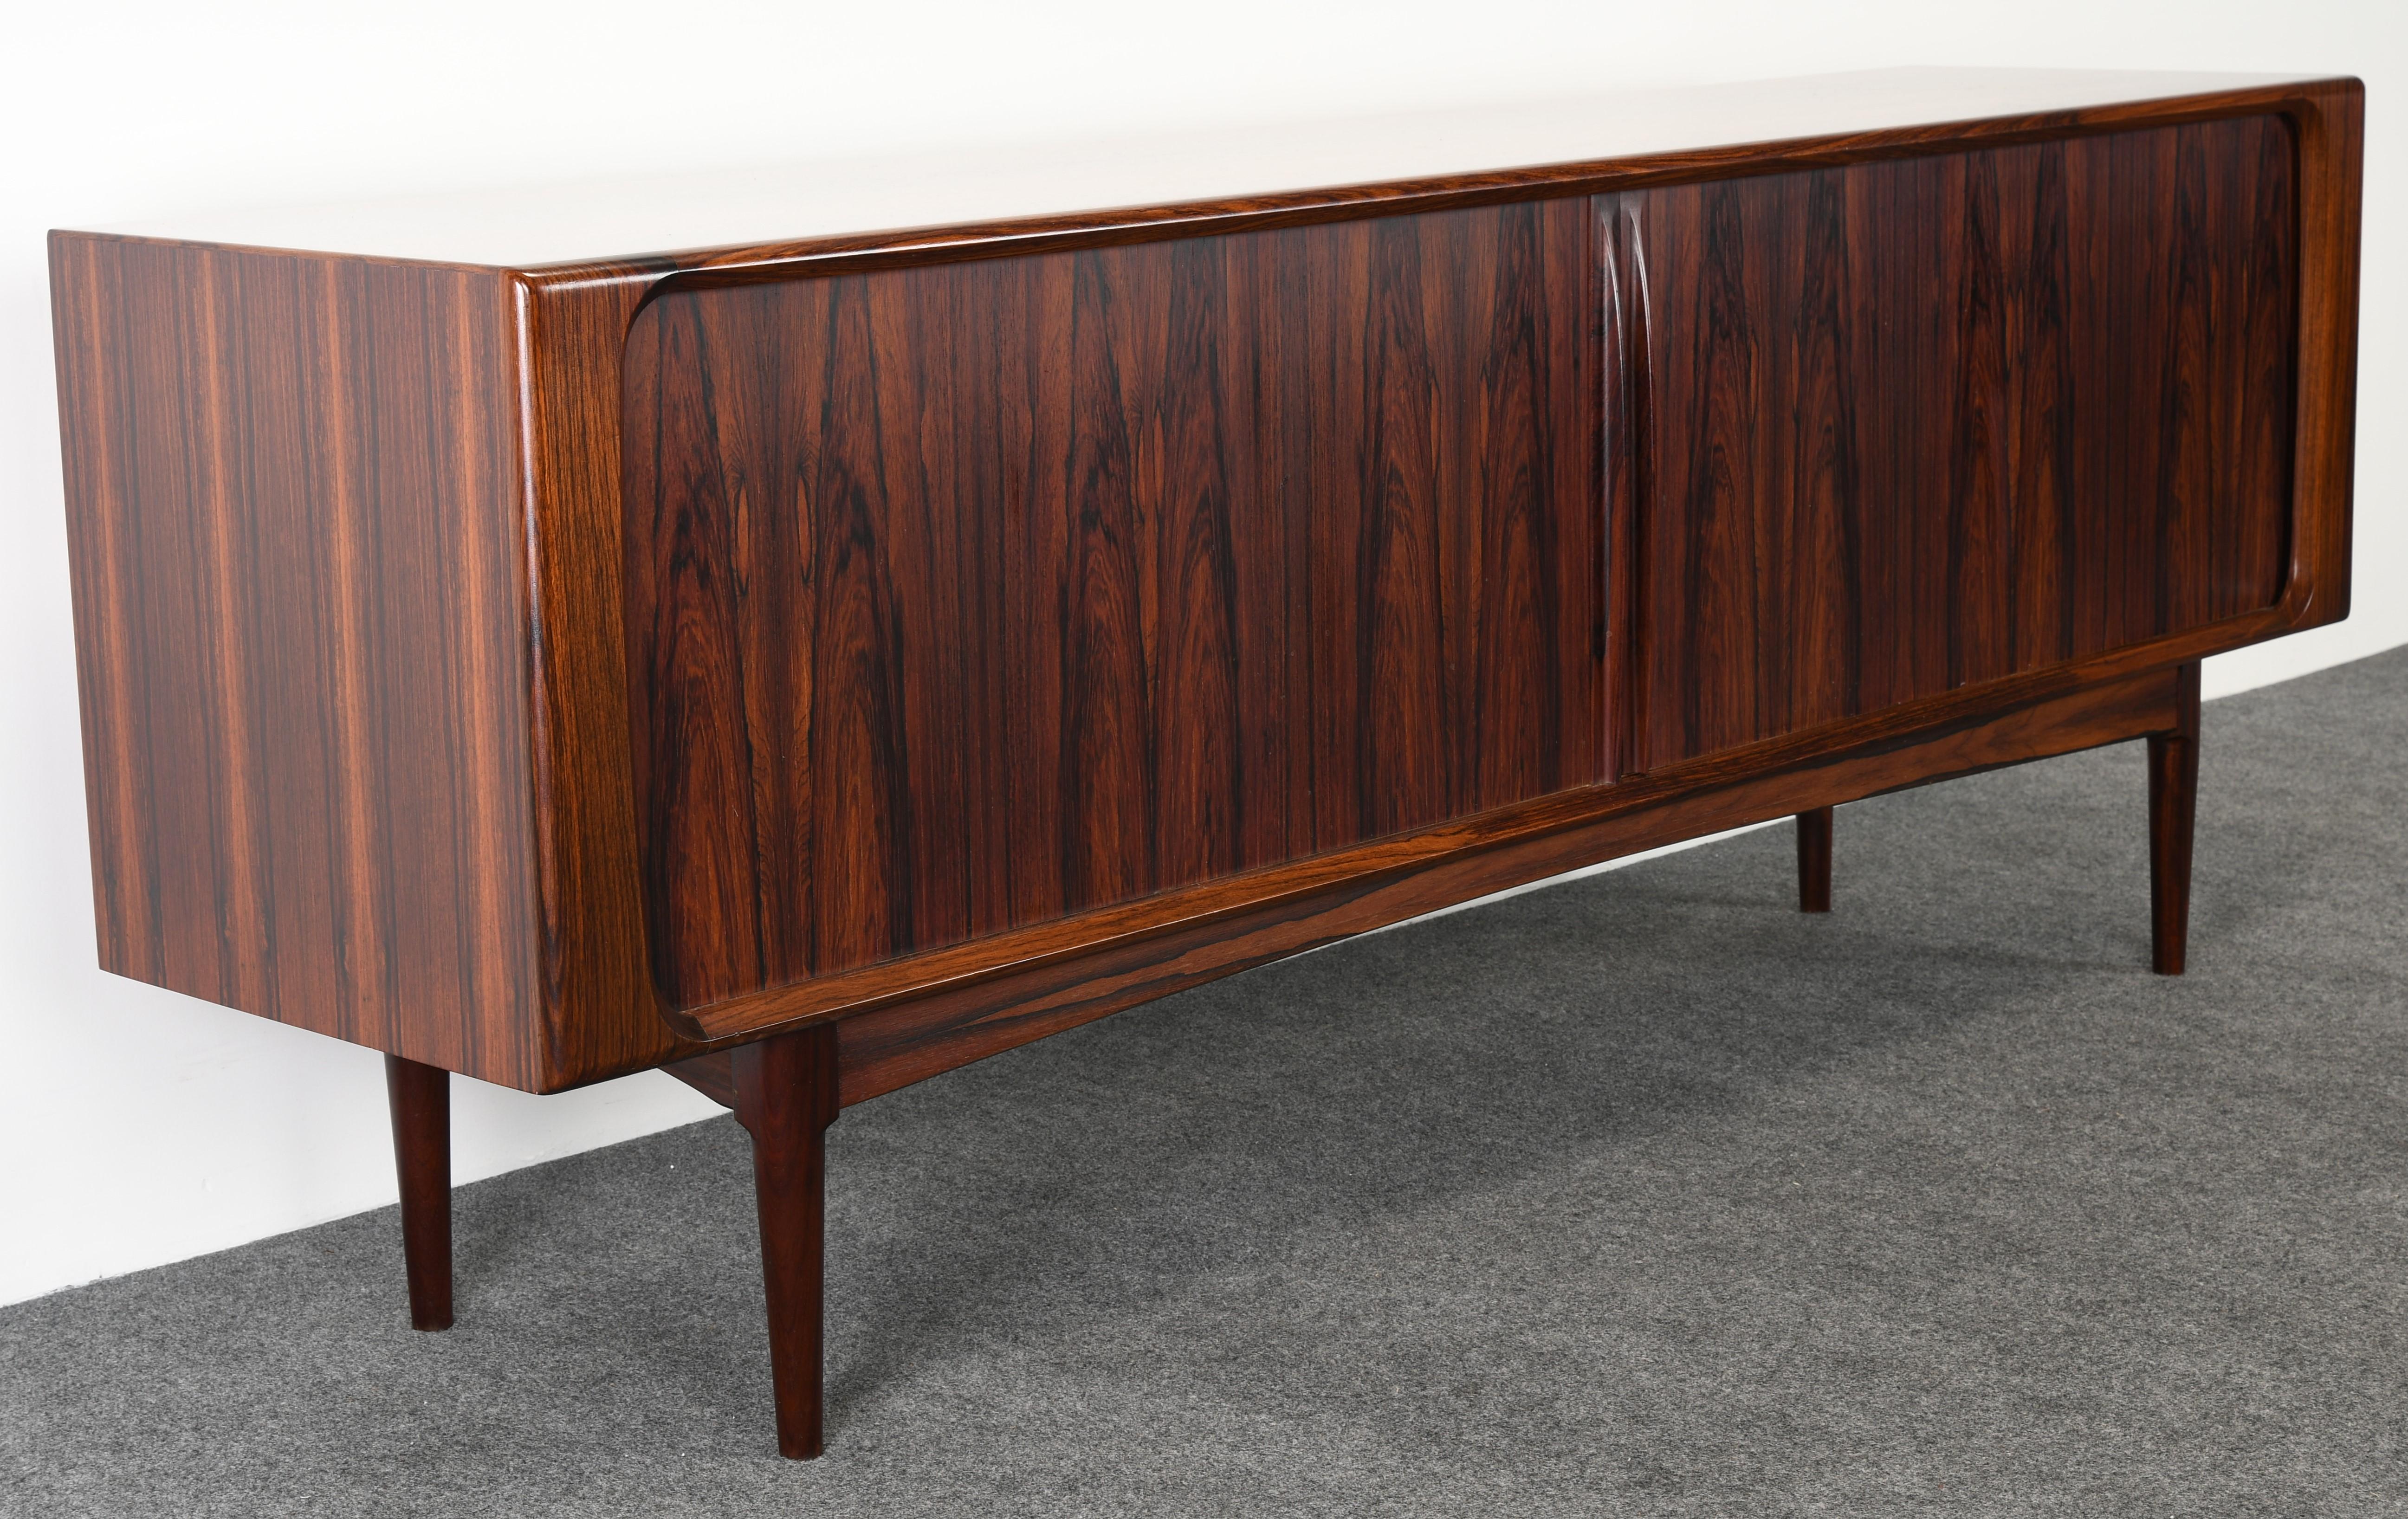 A Danish rosewood credenza or sideboard by Bernhard Pedersen & Son. The cabinet has beautiful graining throughout and is in very good condition. This is one of the best examples we have sold. The backside is finished in Rosewood and can be used in